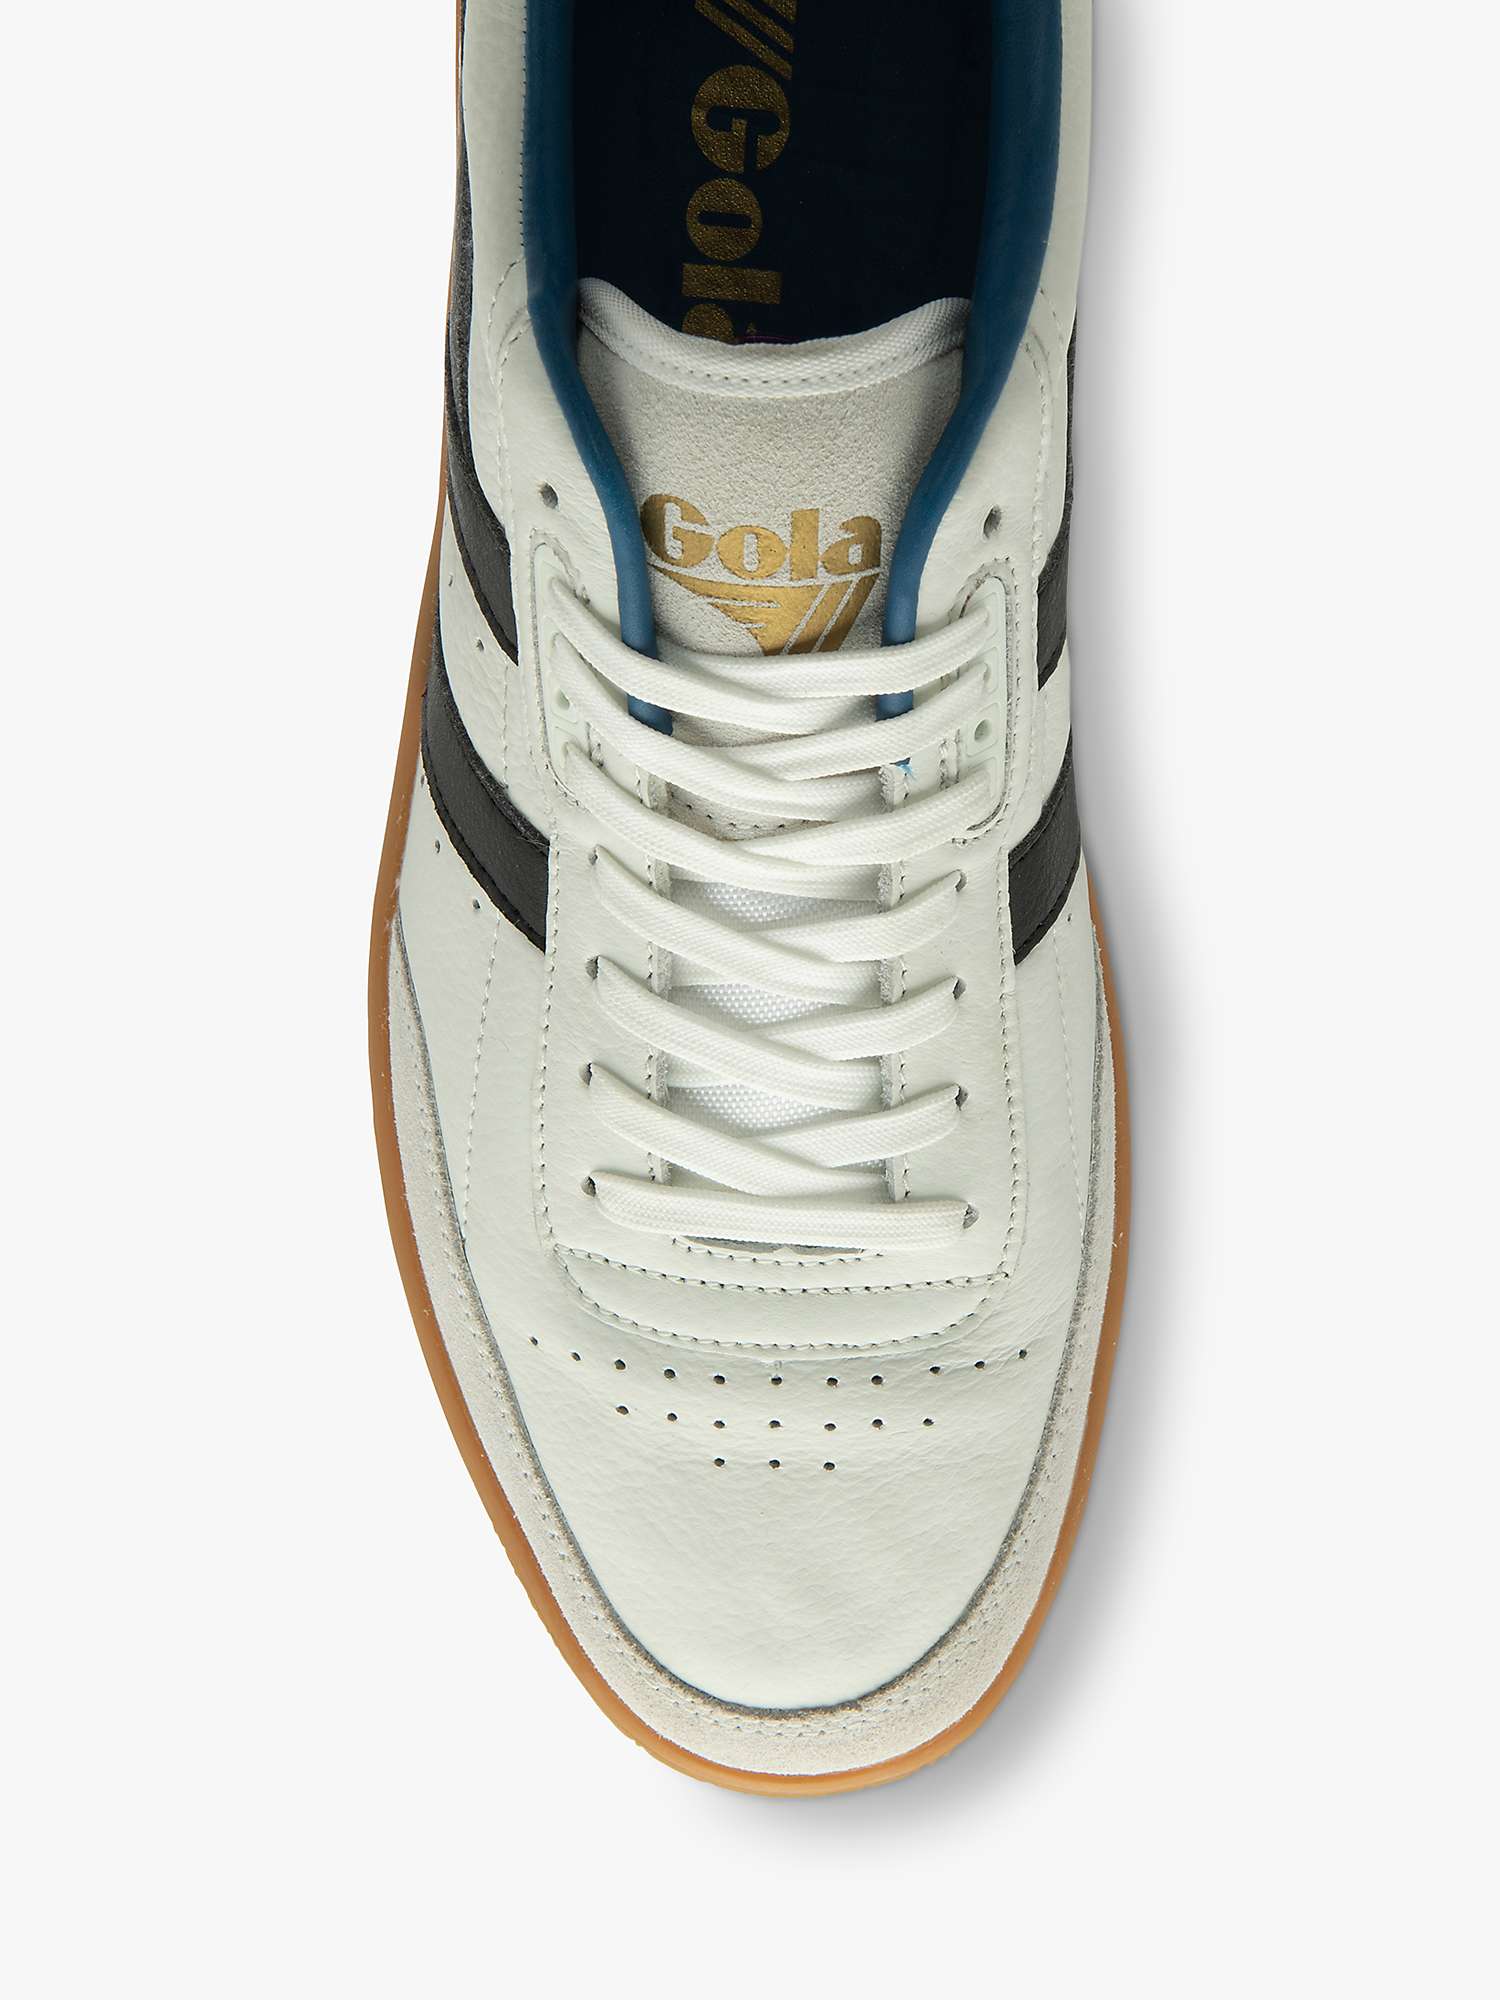 Buy Gola Classics Contact Leather Lace Up Trainers, White/Black/Blue/Gum Online at johnlewis.com